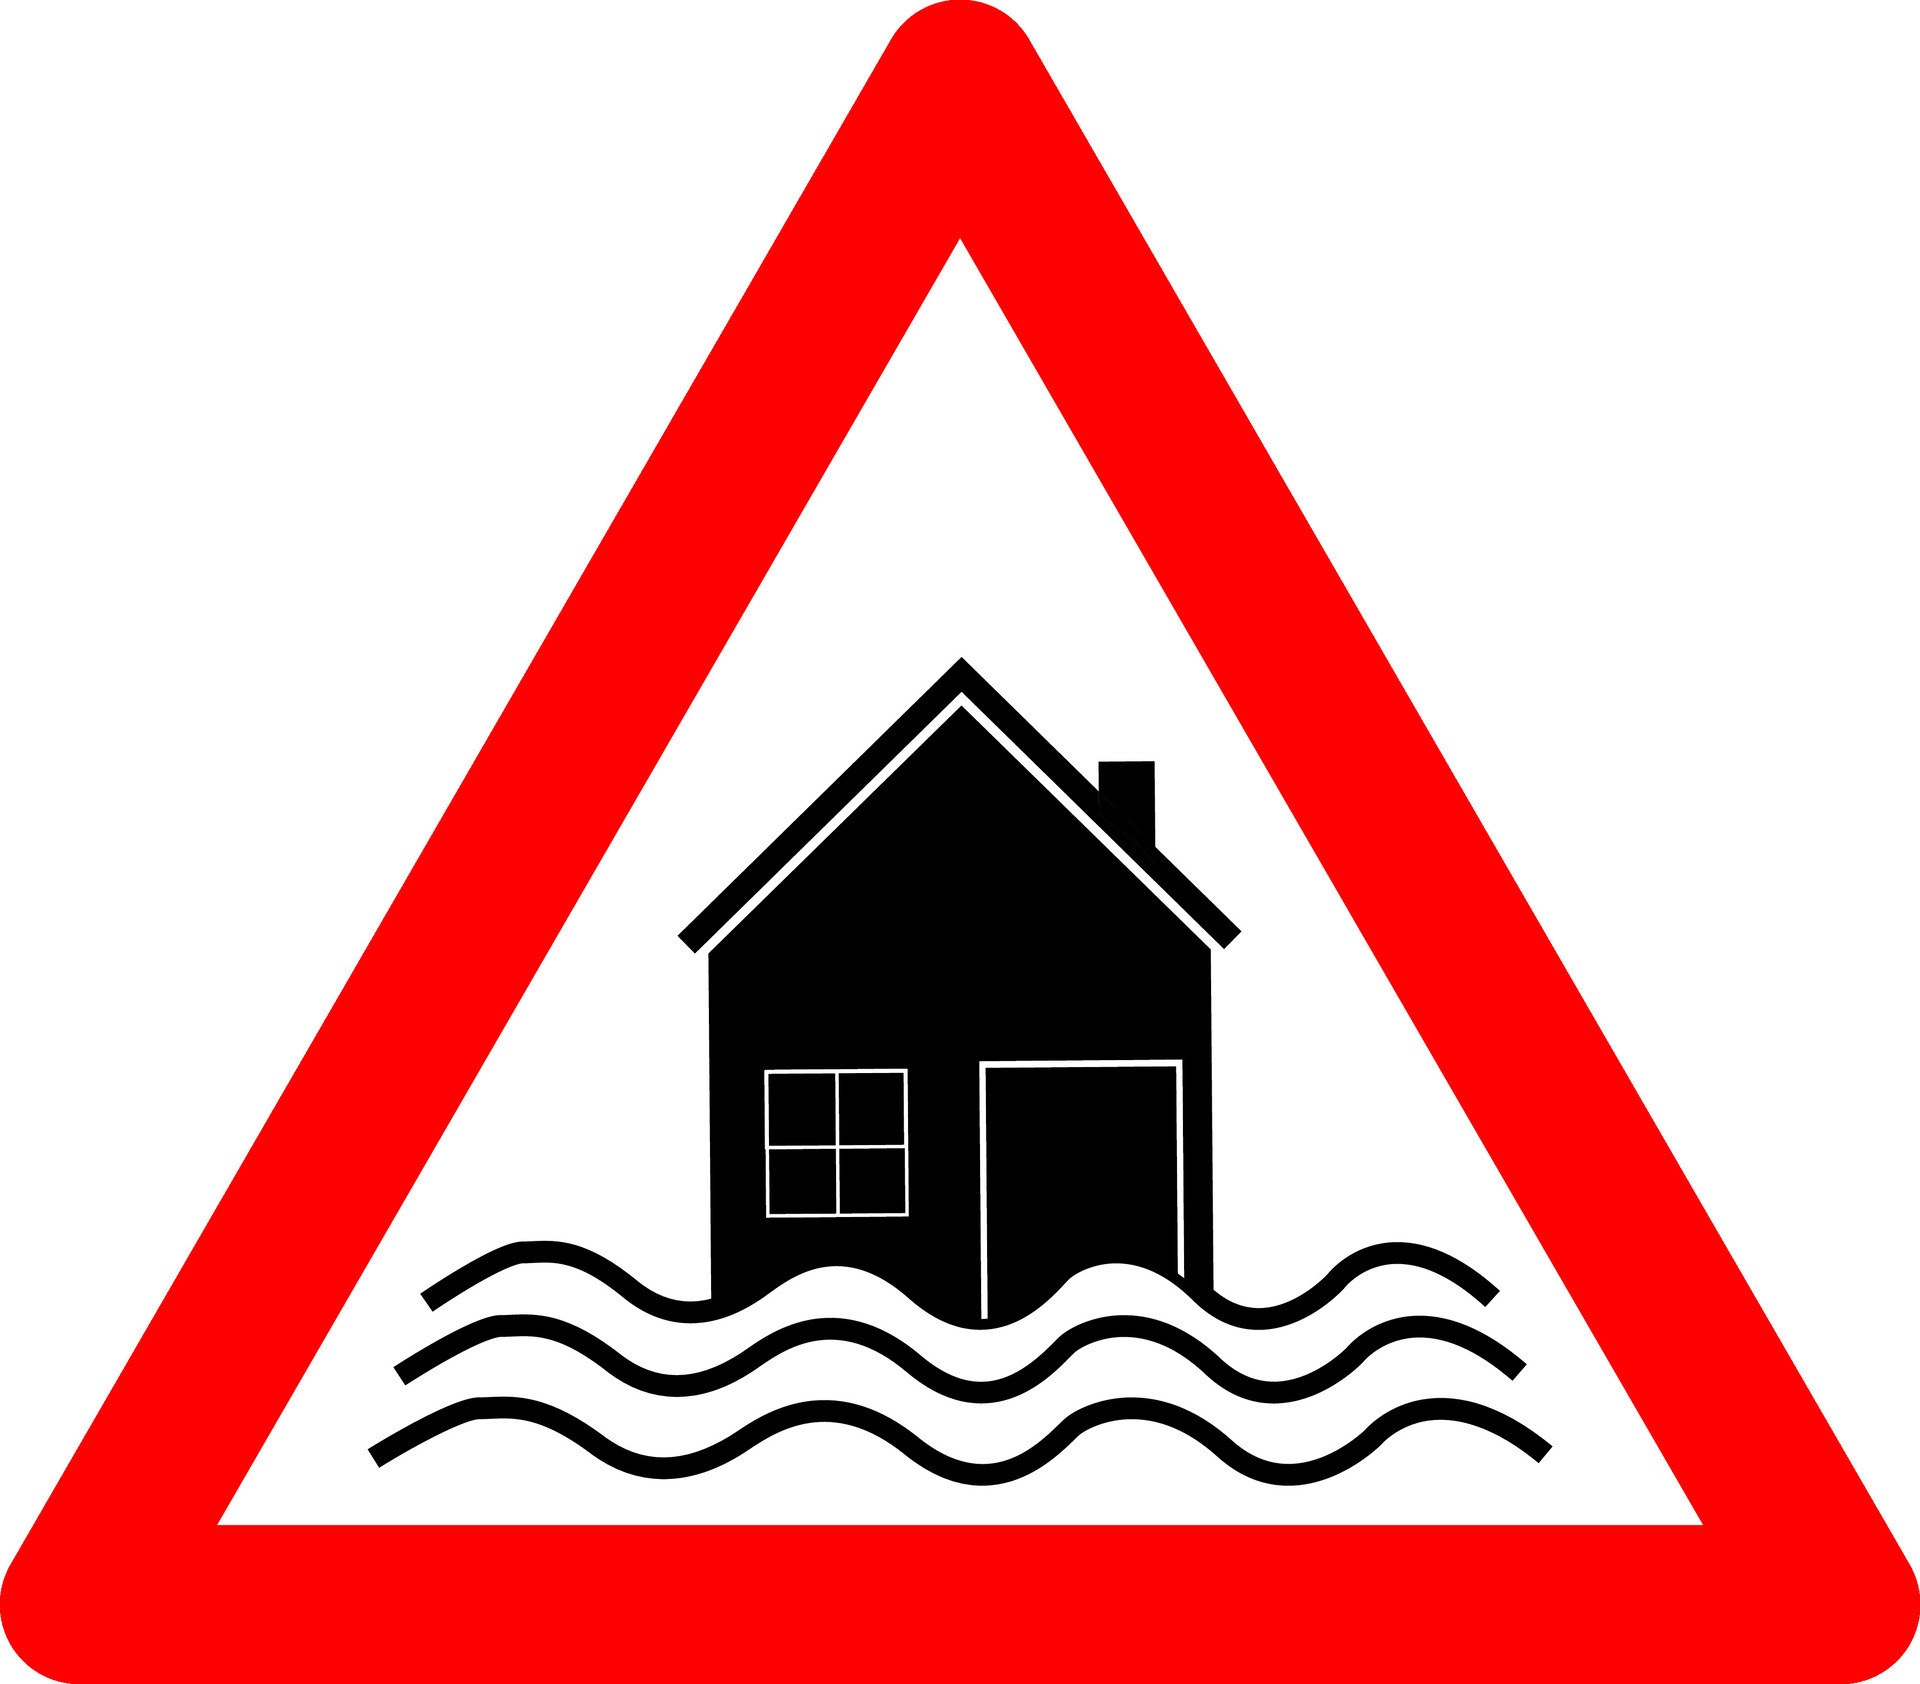 Flood sign. Flood risk warning sign. Red triangle sign with a ...